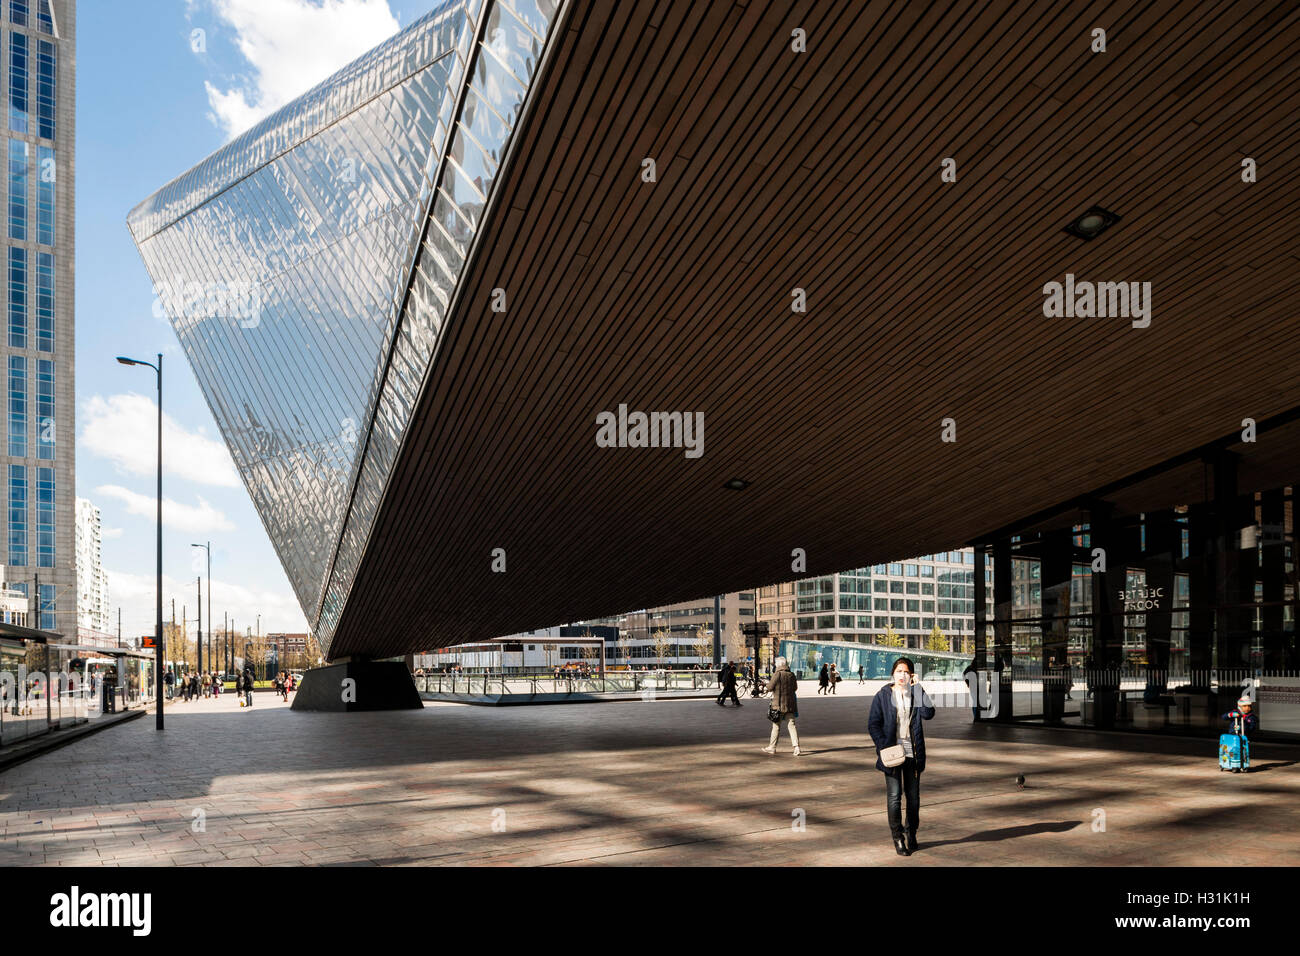 Passengers crossing the open plaza underneath the metal clad canopy. Centraal Station, Rotterdam, Netherlands. Architect: Benthem Crouwel Architects + MVSA Architects + Wes, 2014. Stock Photo